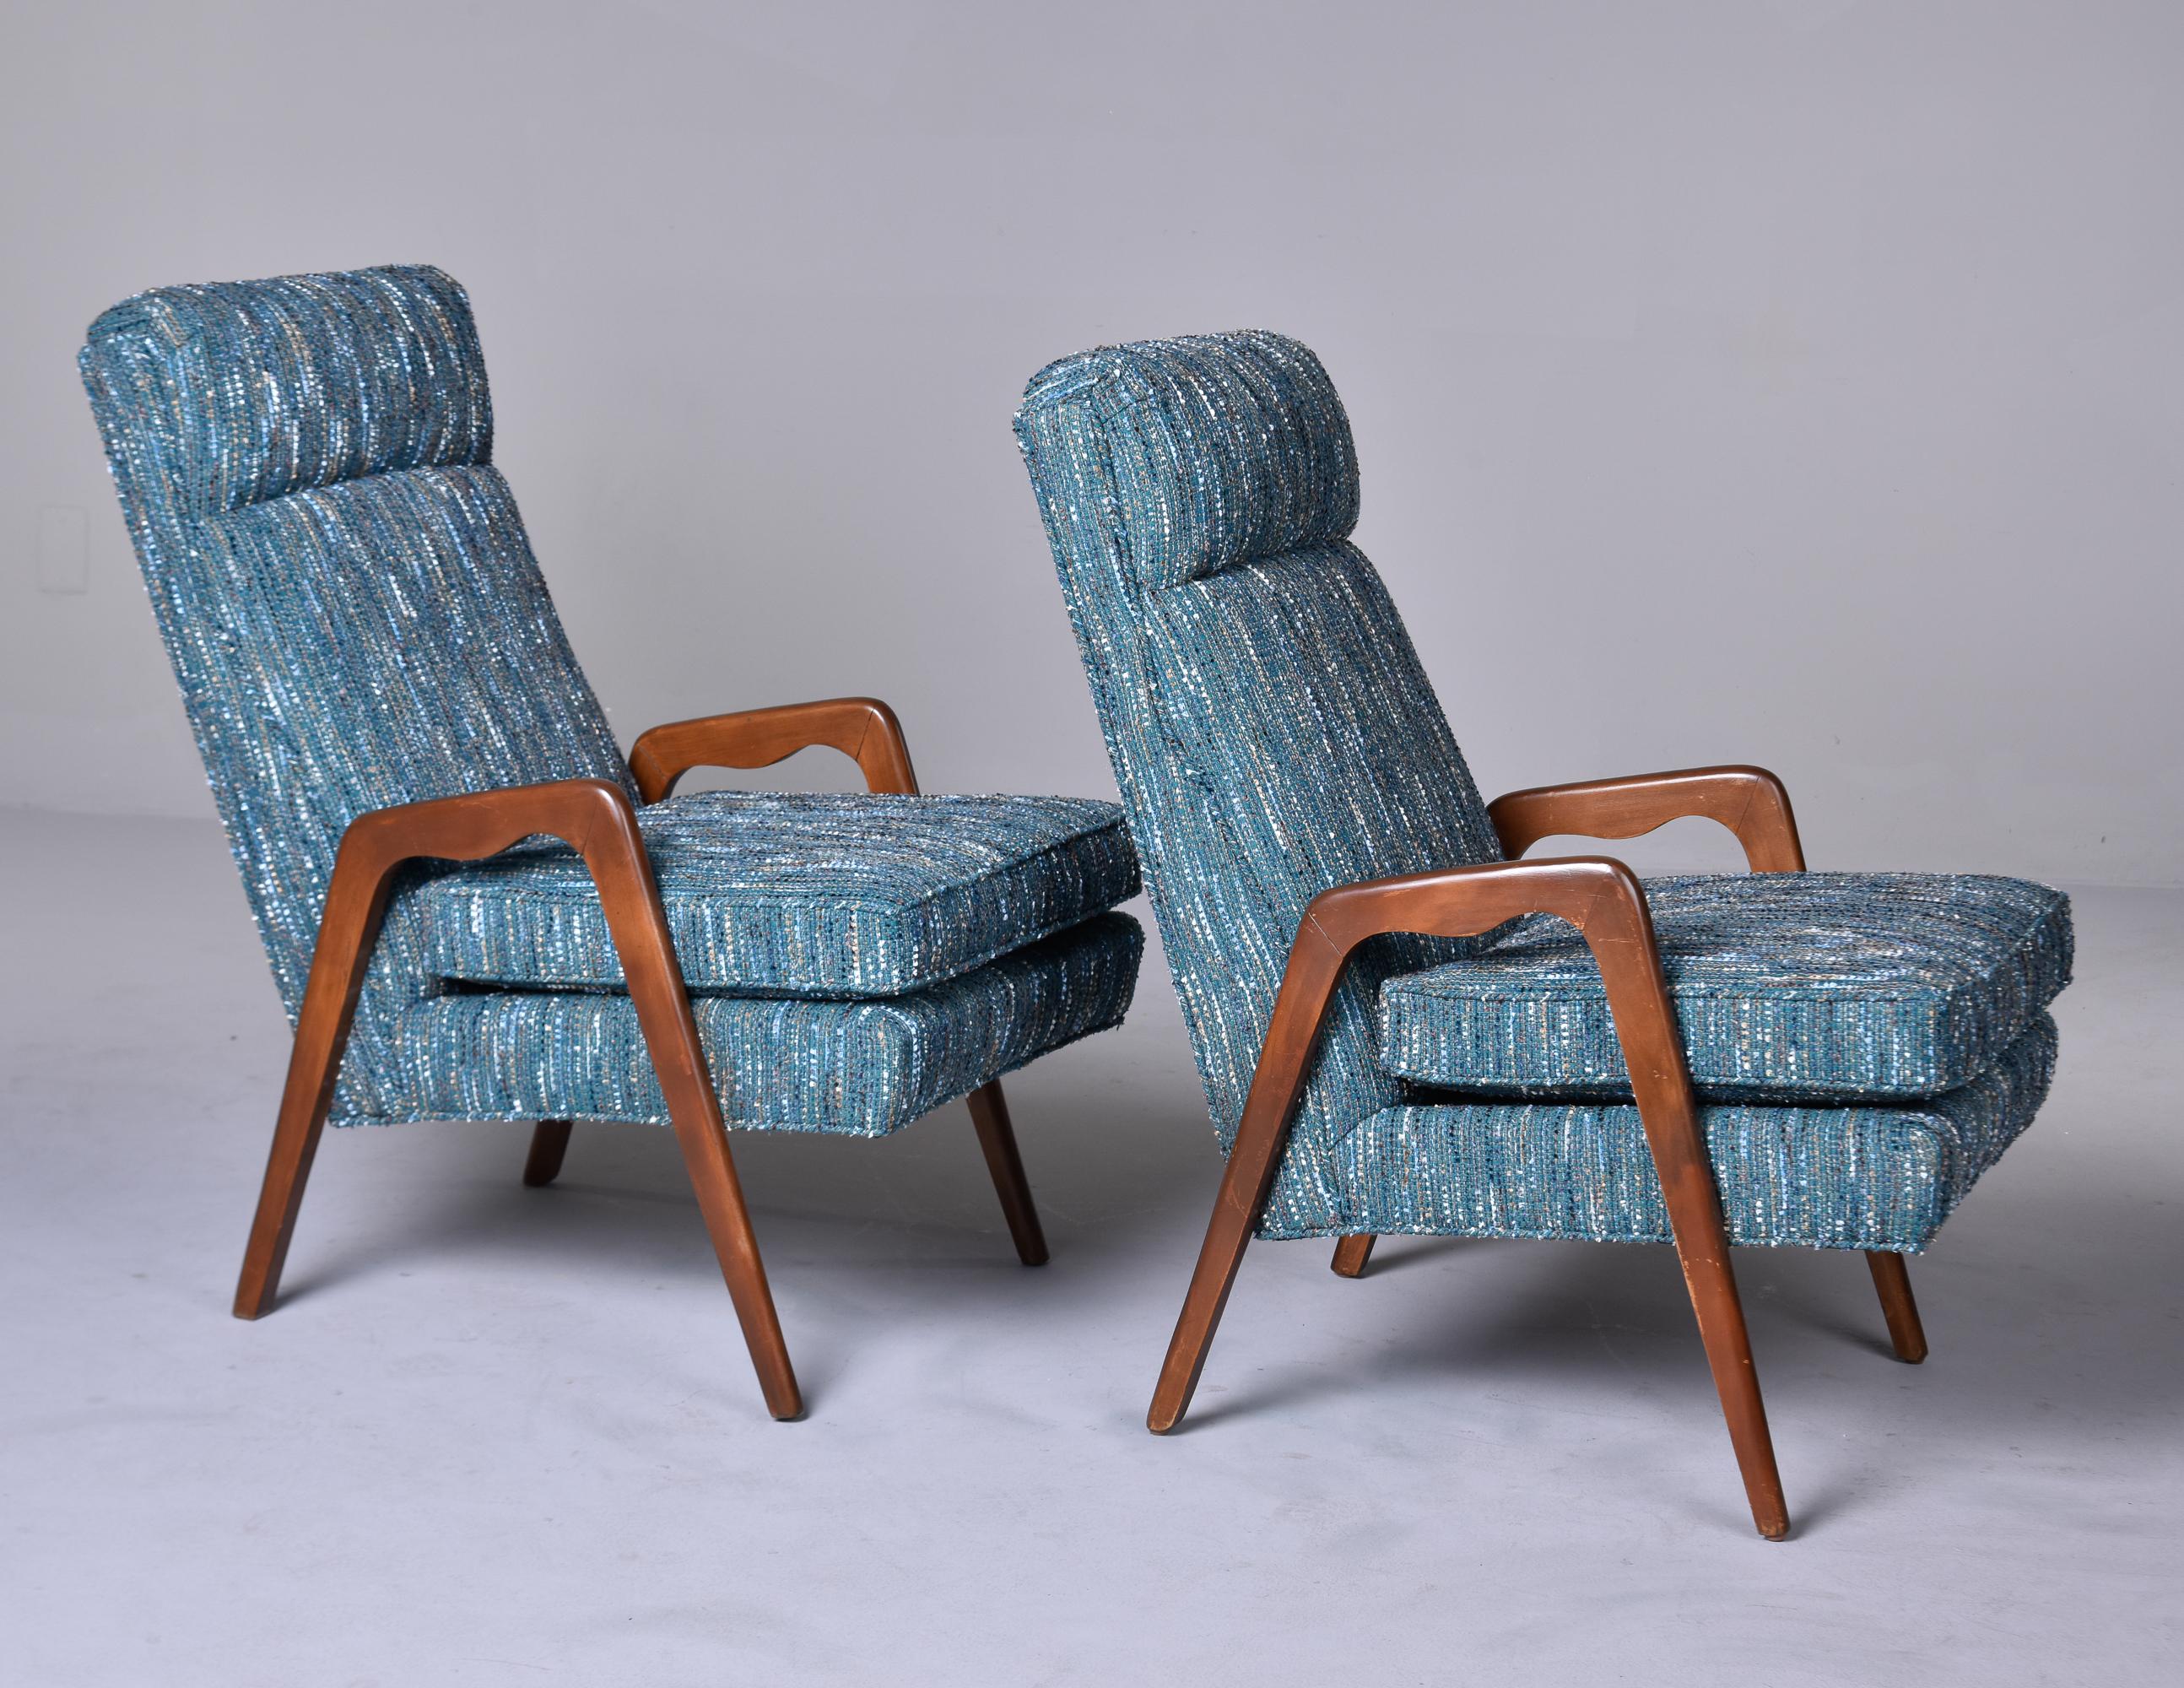 Pair of Mid-Century Italian Chairs with New Teal Tweed Upholstery For Sale 5